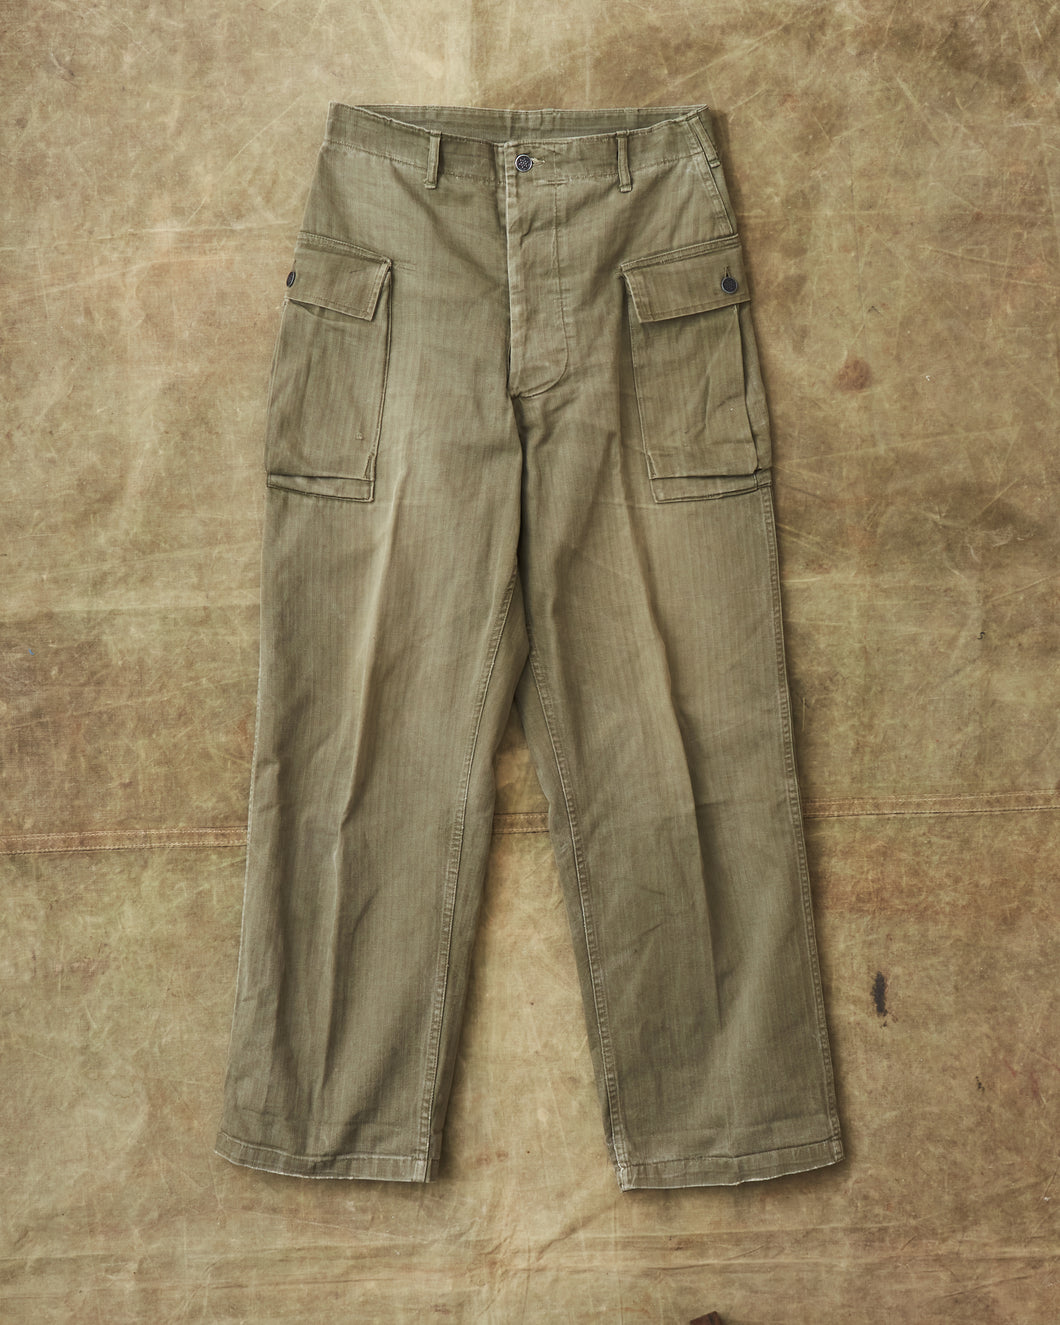 Vintage US Army M-42 WWII HBT Twill Pants Size 33